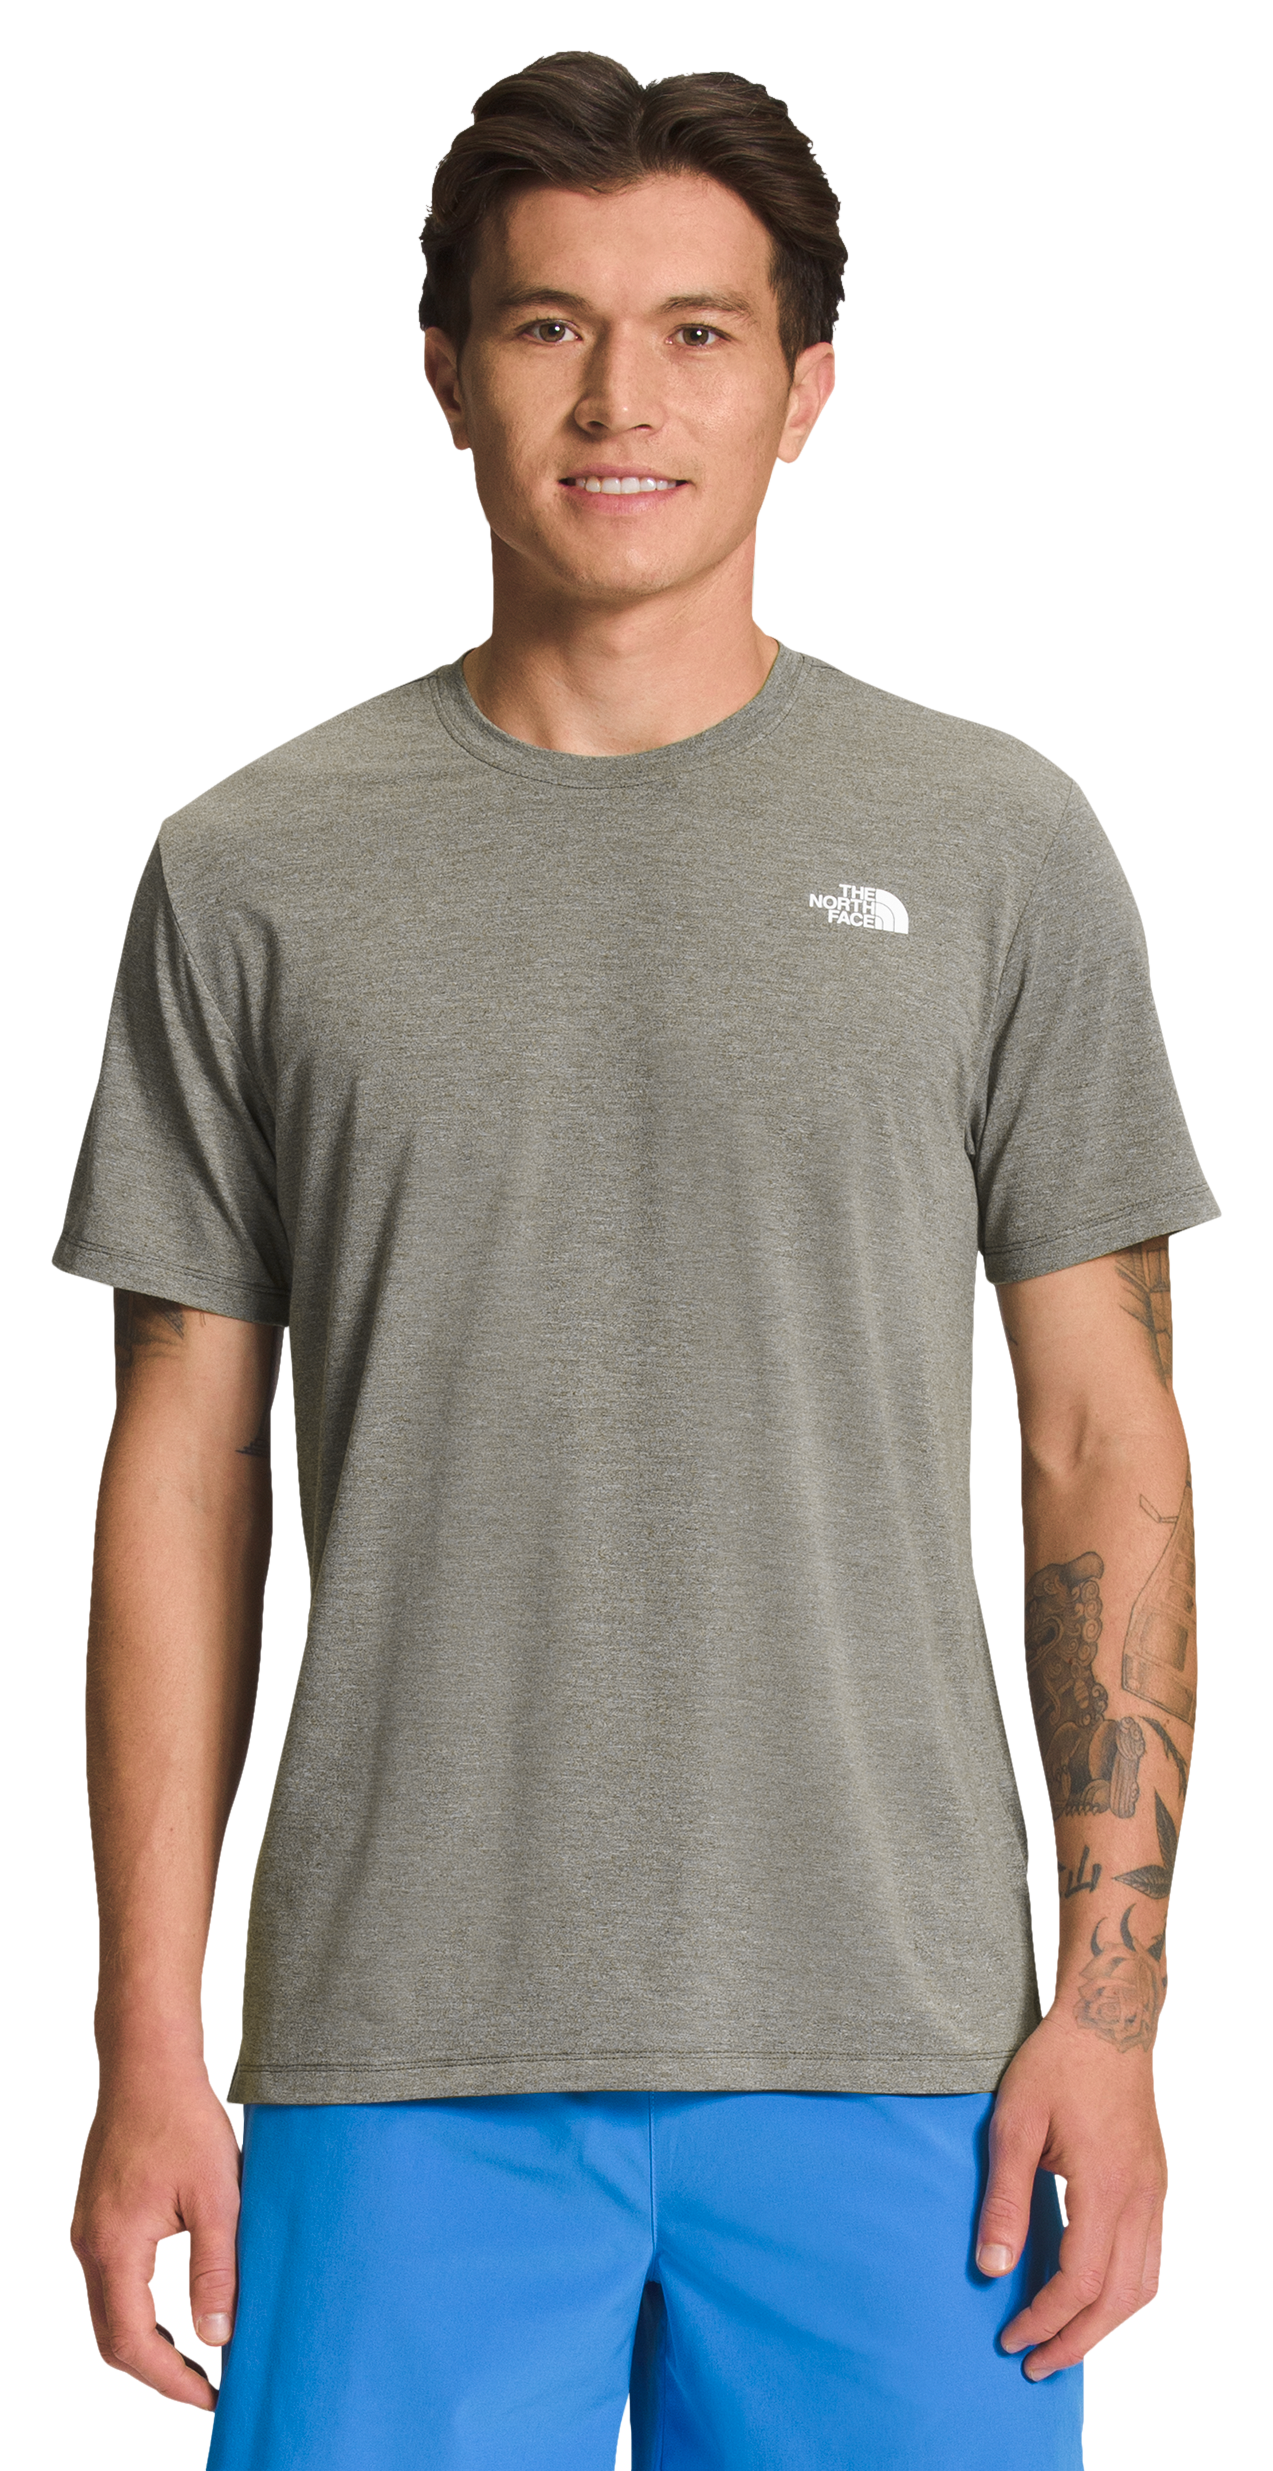 The North Face Wander Short-Sleeve Shirt for Men - New Taupe Green Heather - 2XL